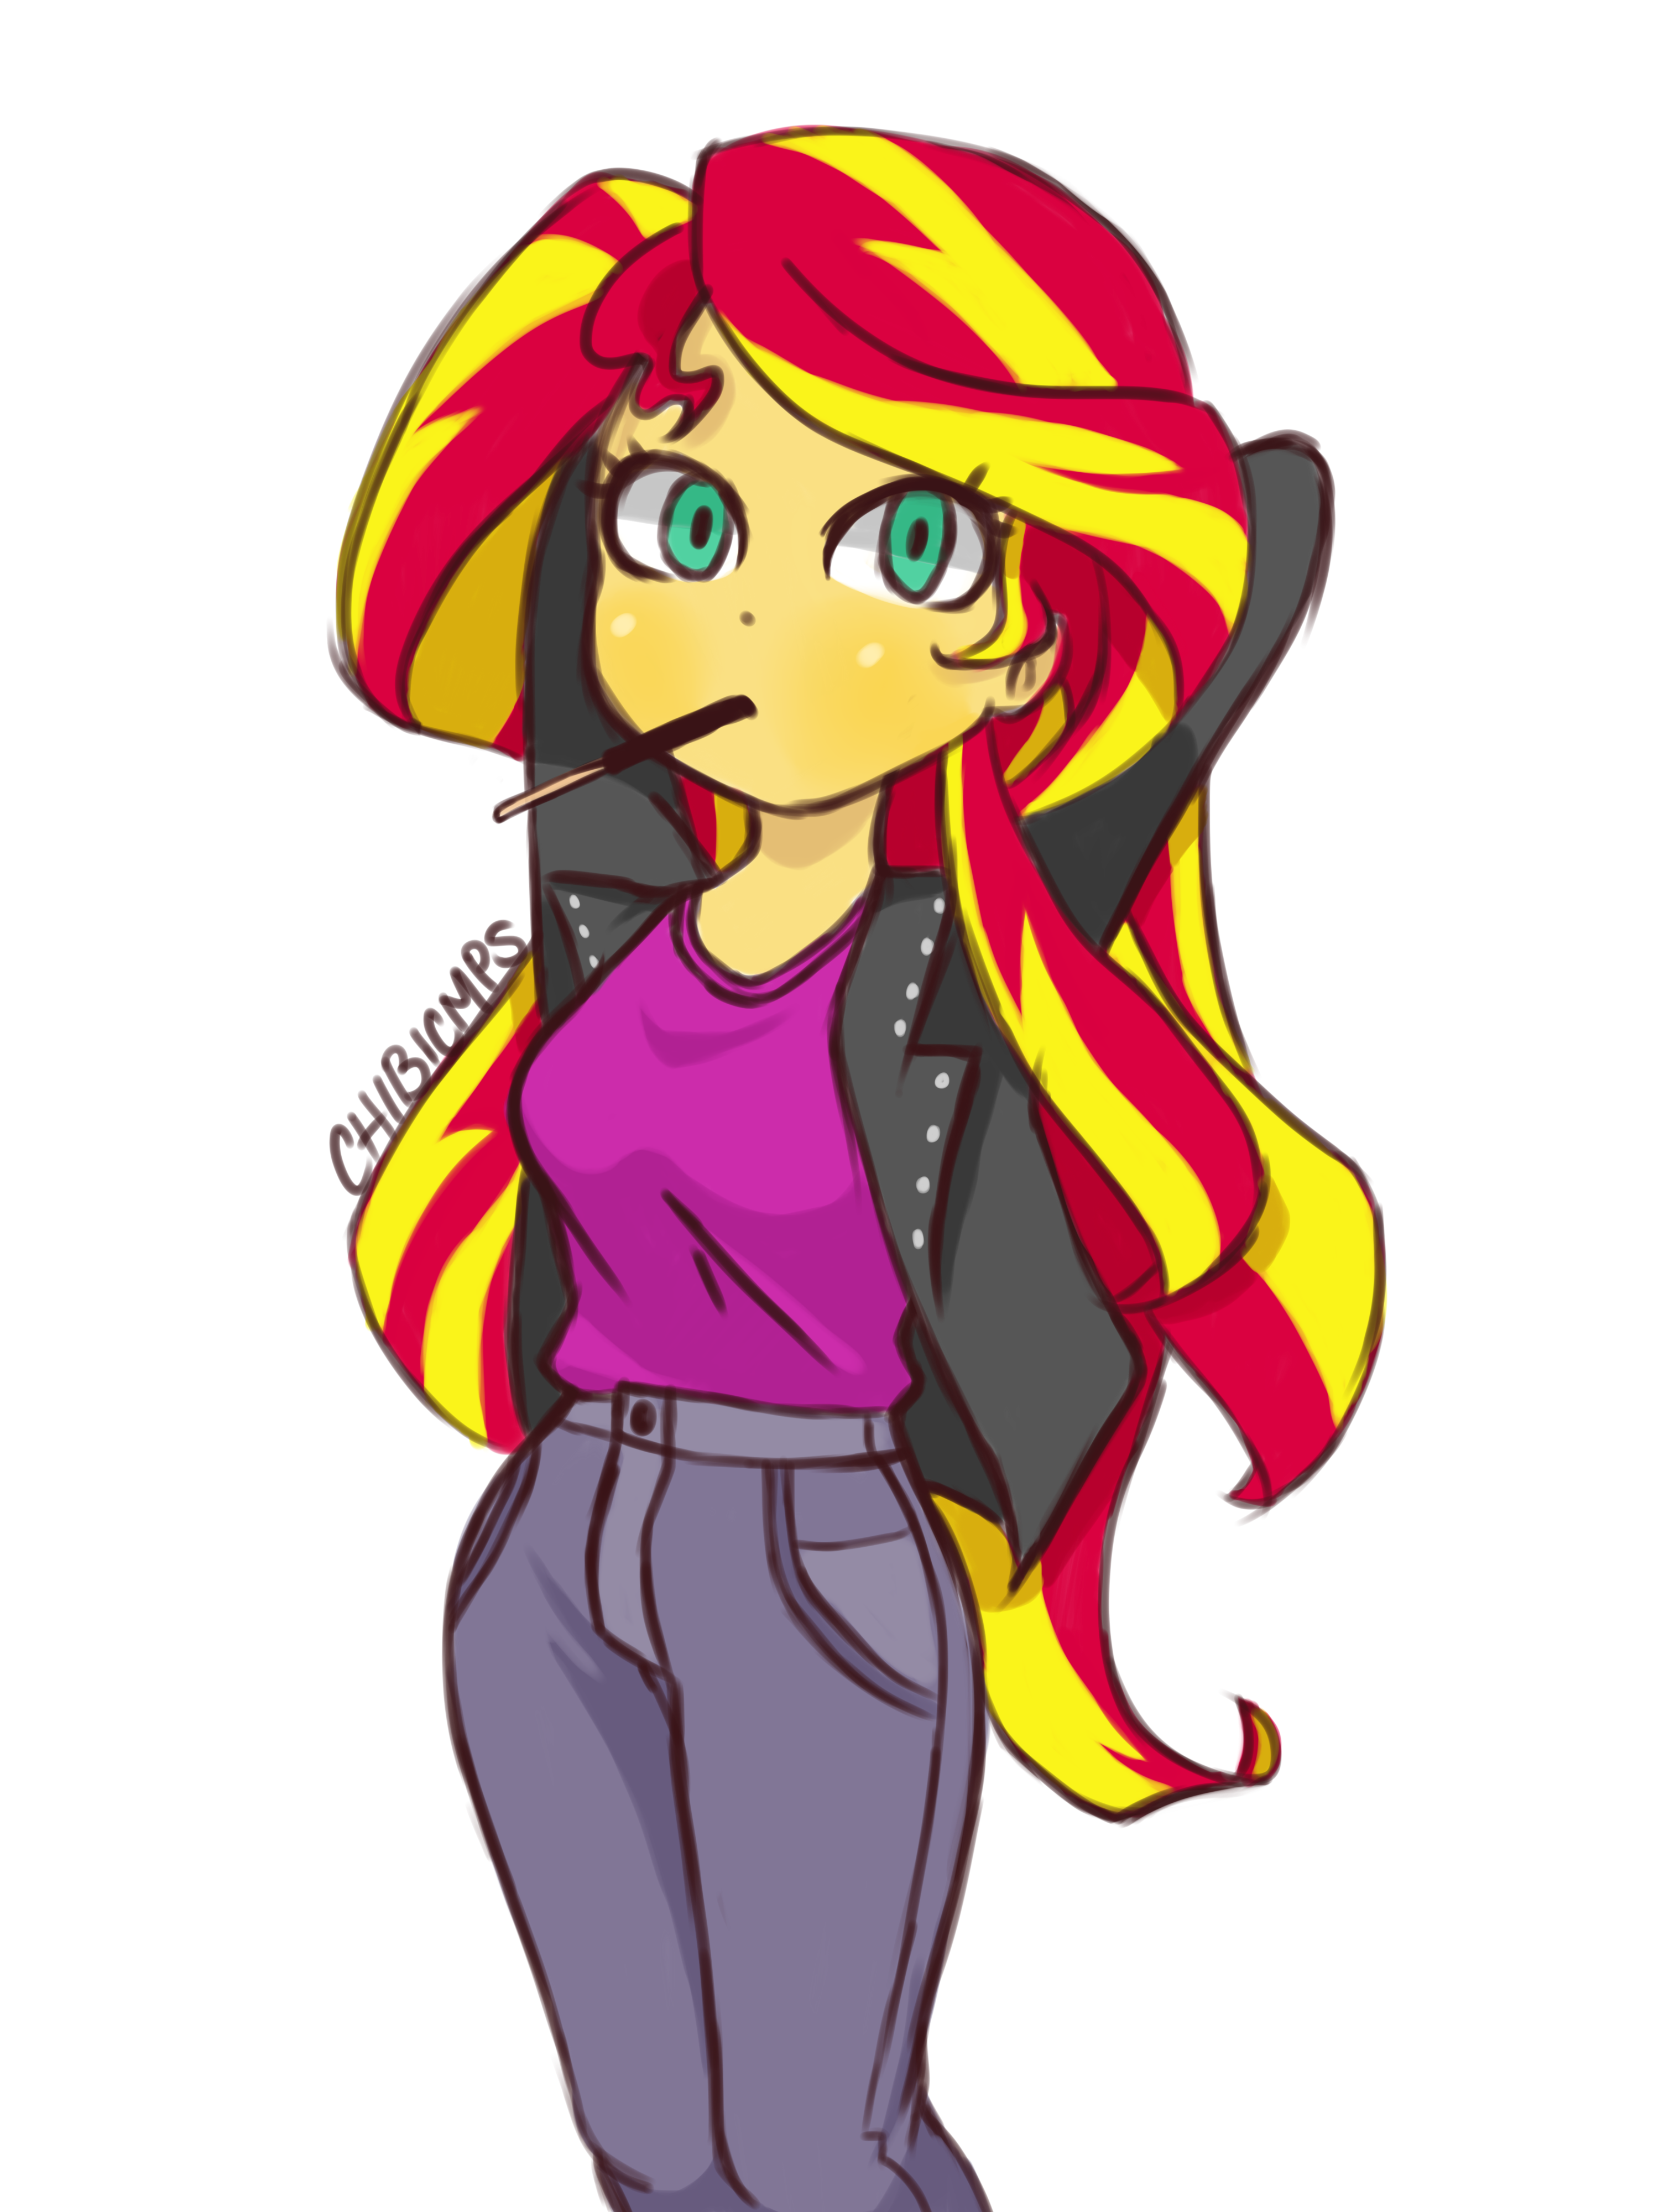 http://orig11.deviantart.net/4ffa/f/2015/062/7/e/sunsetshimmer_by_chibicmps-d8kbcmc.png